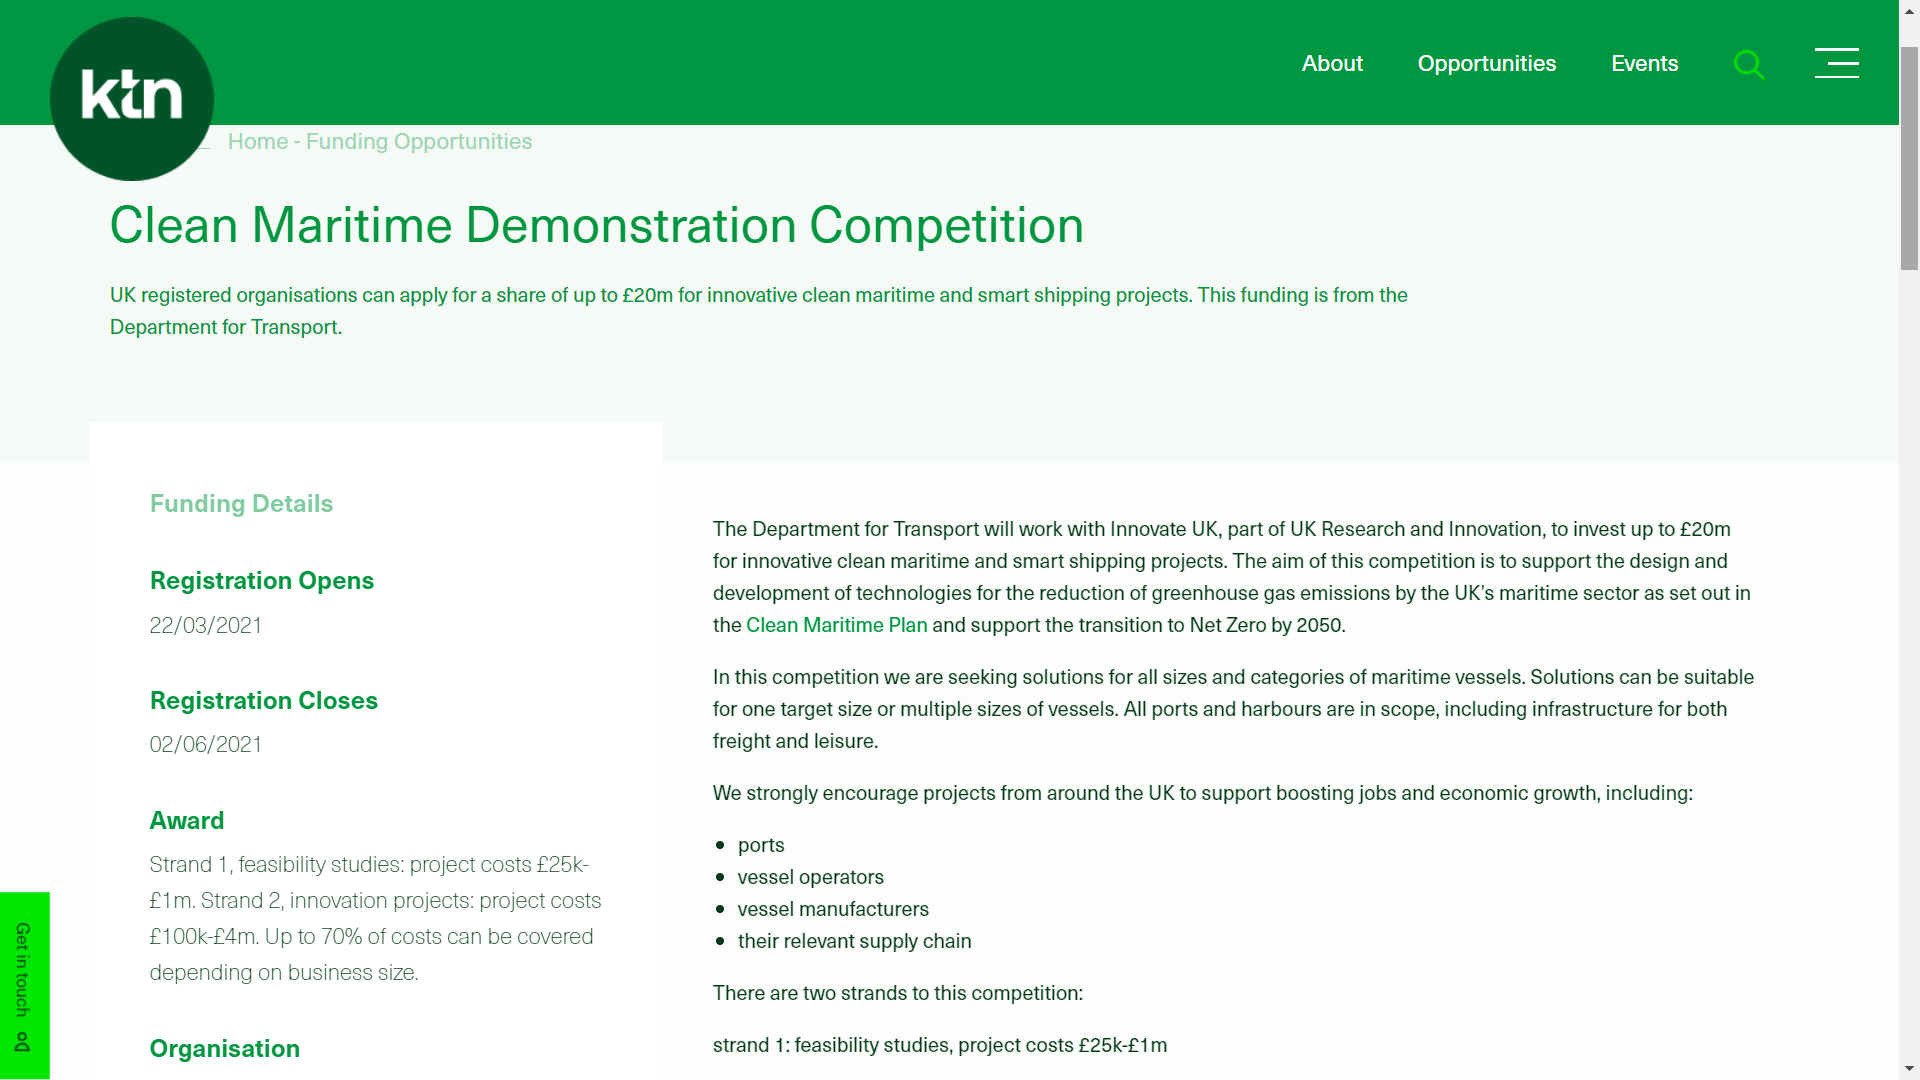 KTN Knowledge Transfer Network and Innovate UK clean maritime demonstration competition